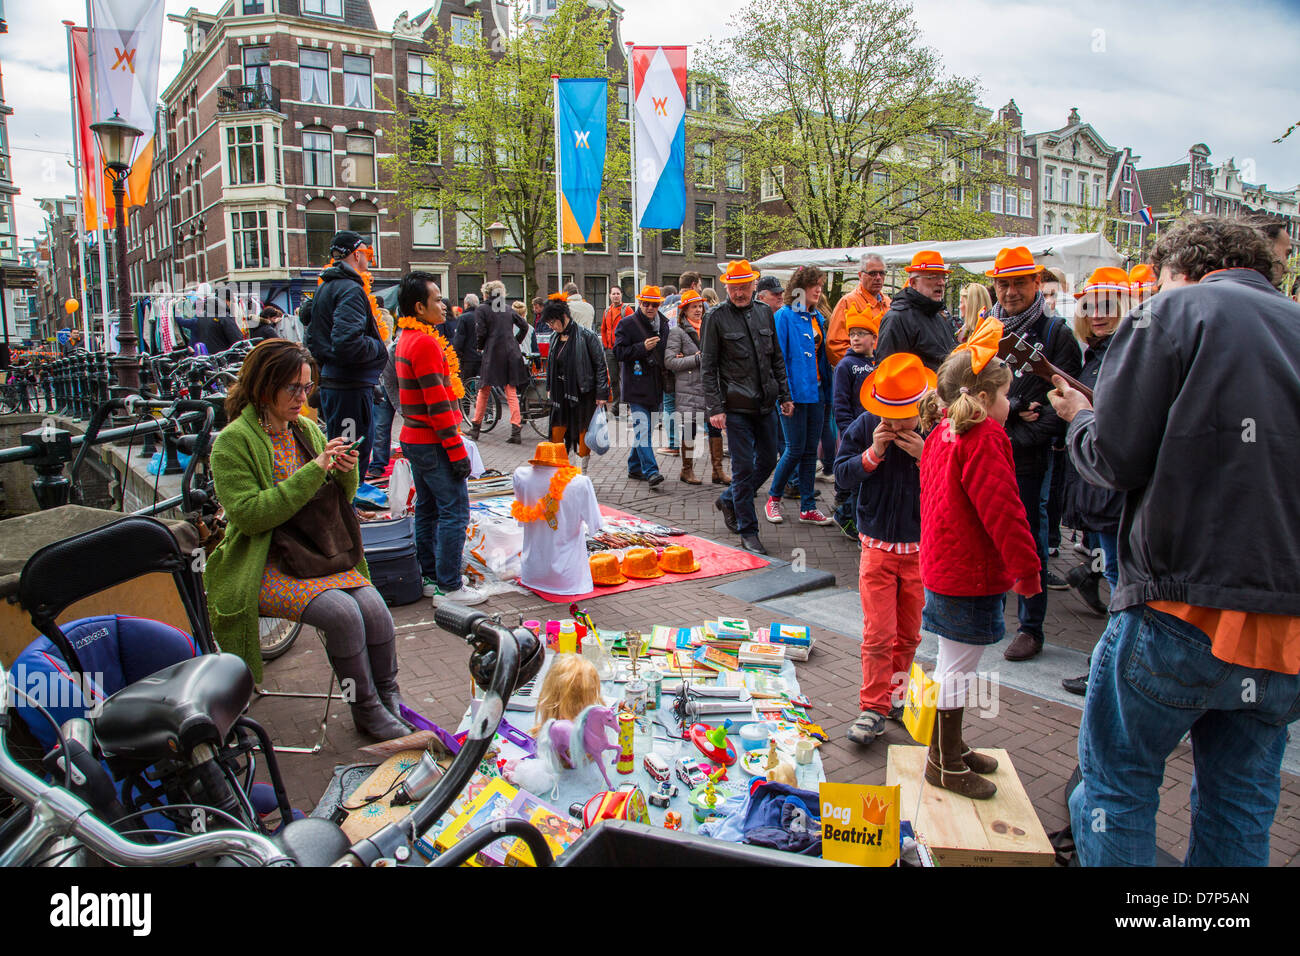 Celebrating Queens day in the Netherlands. Flee market stands in the old town of Amsterdam. Stock Photo